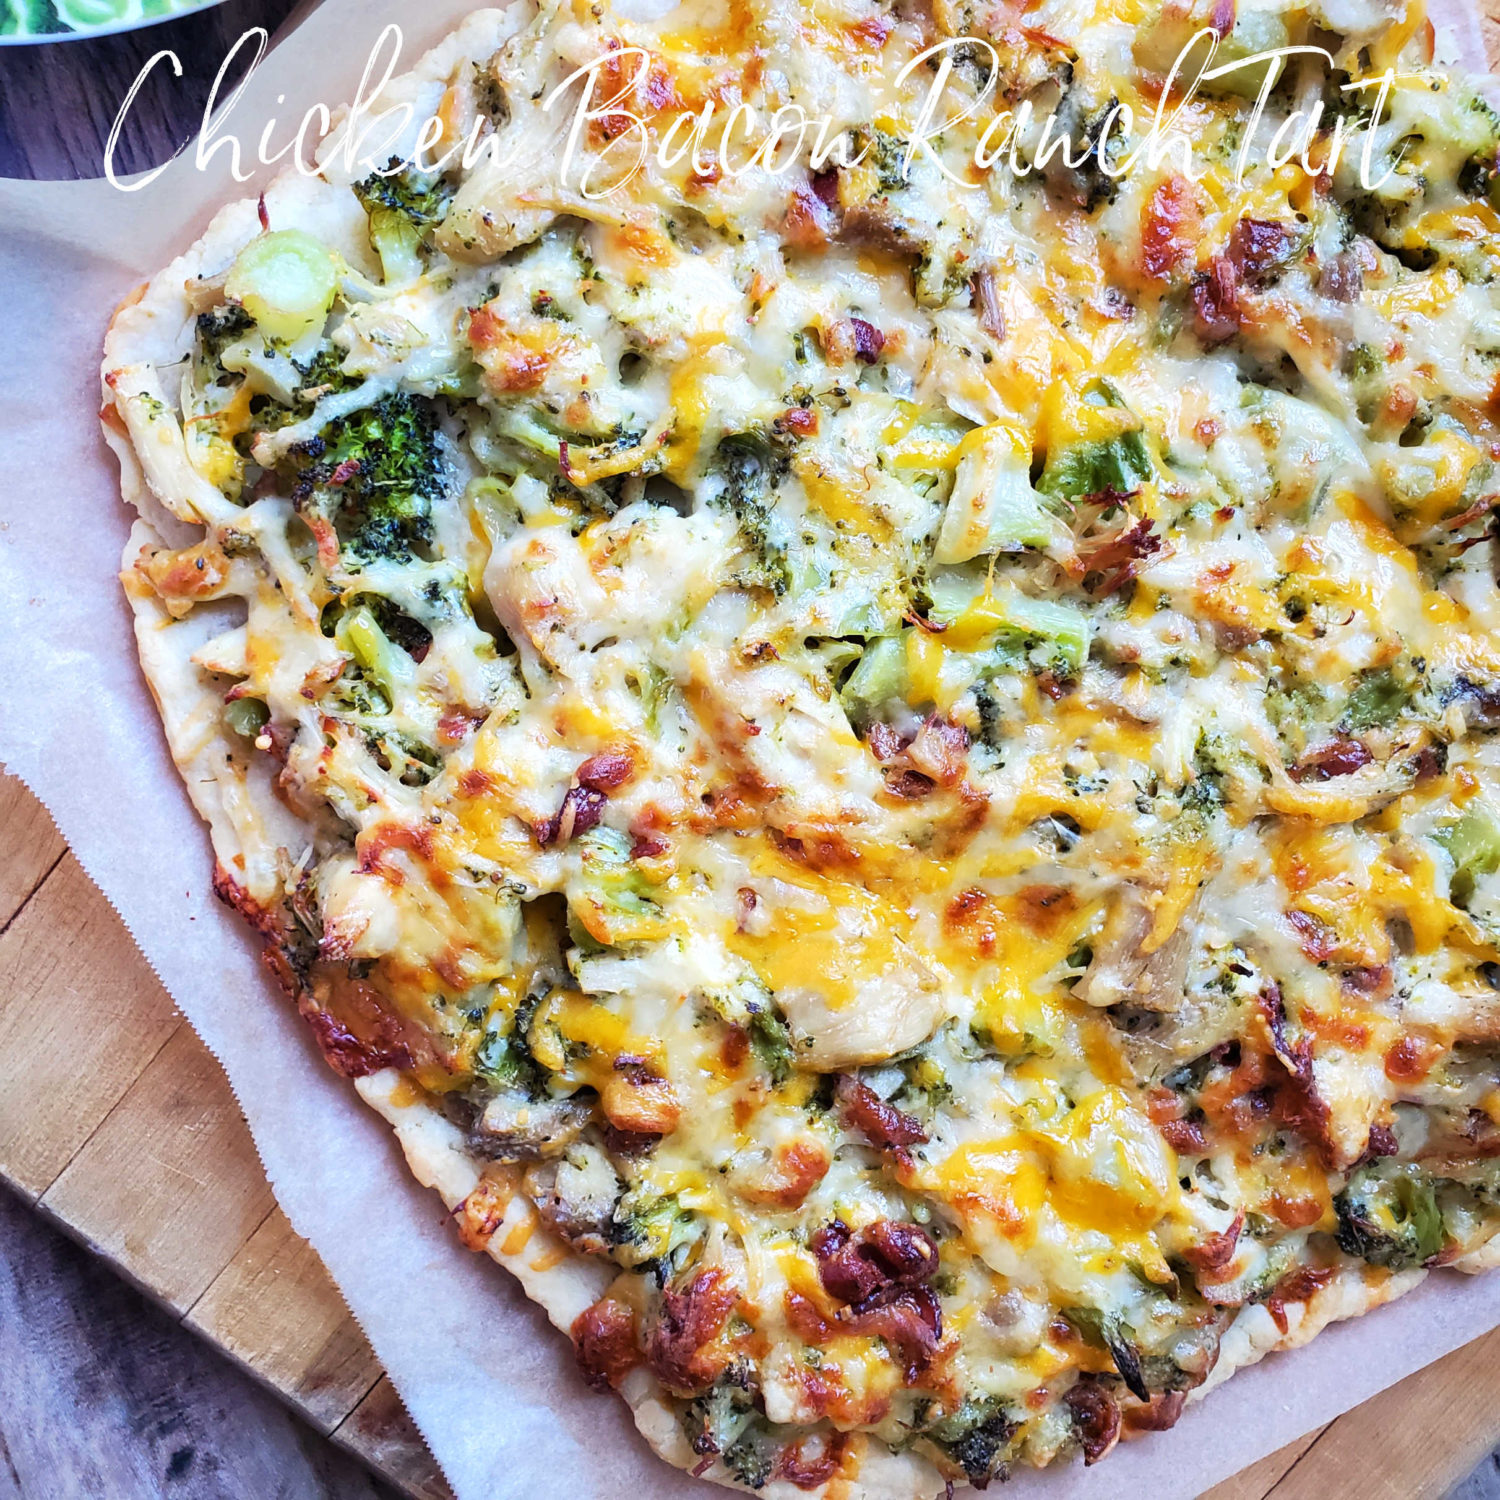 Chicken Bacon Ranch Tart: Chicken, bacon, ranch seasoning, and veggies, sizzling hot with melted cheeses, and a tender flaky sour cream crust